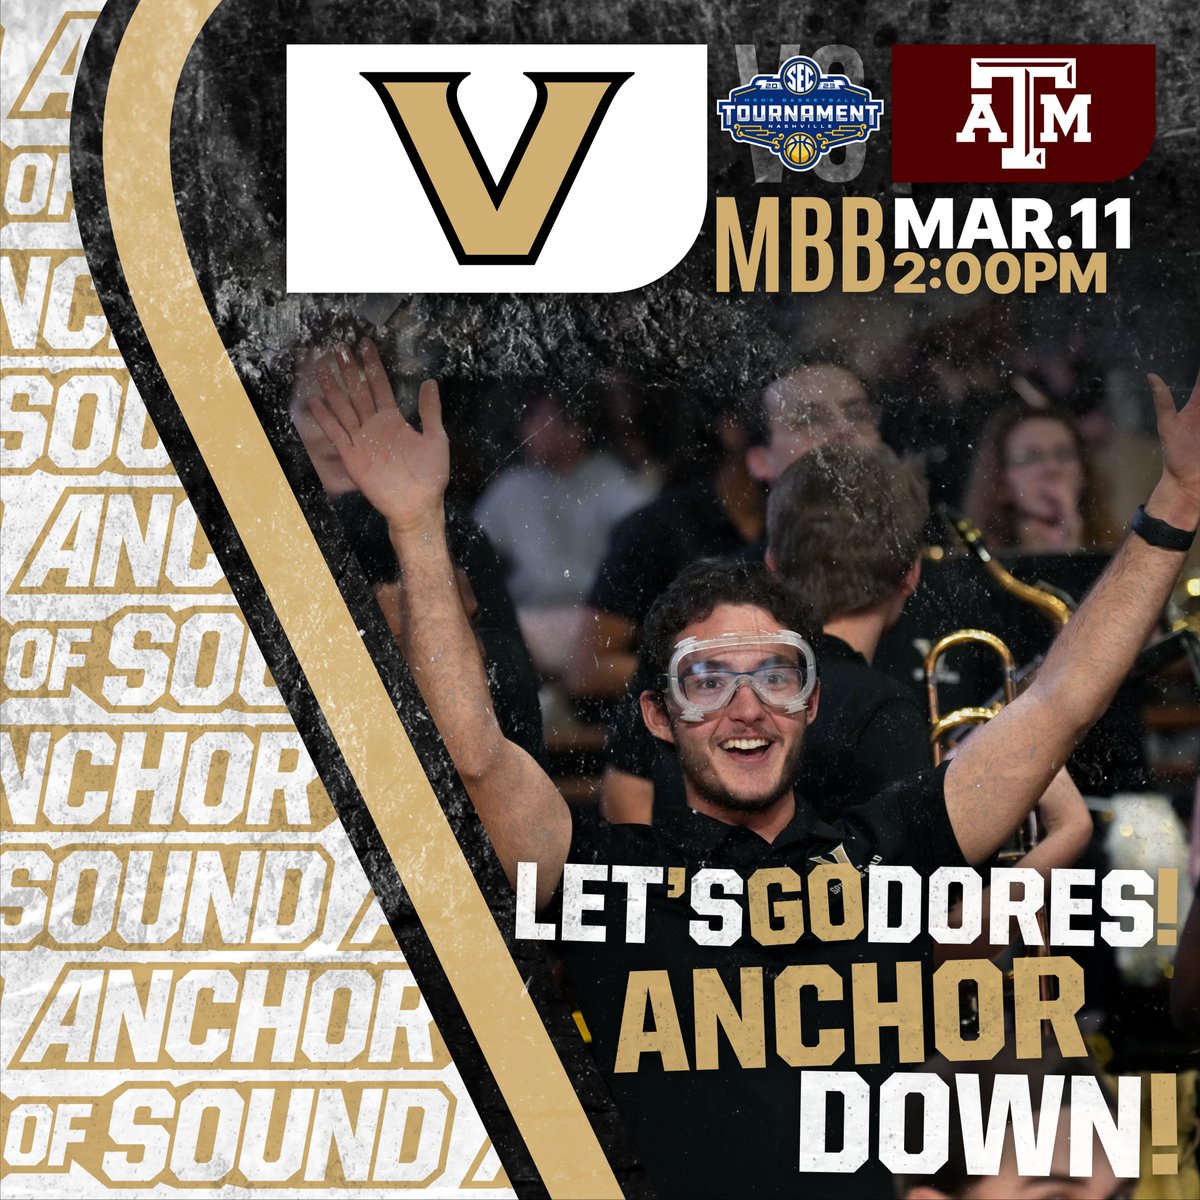 Anchor of Sound RETURNS to @BrdgstoneArena this afternoon to cheer on the Commodores as @VandyMBB faces the Aggies of Texas A&M in the semifinals of the #SECTourney! #AnchorDown #SECMBB #SOGILTB @vucommodores @VanderbiltU